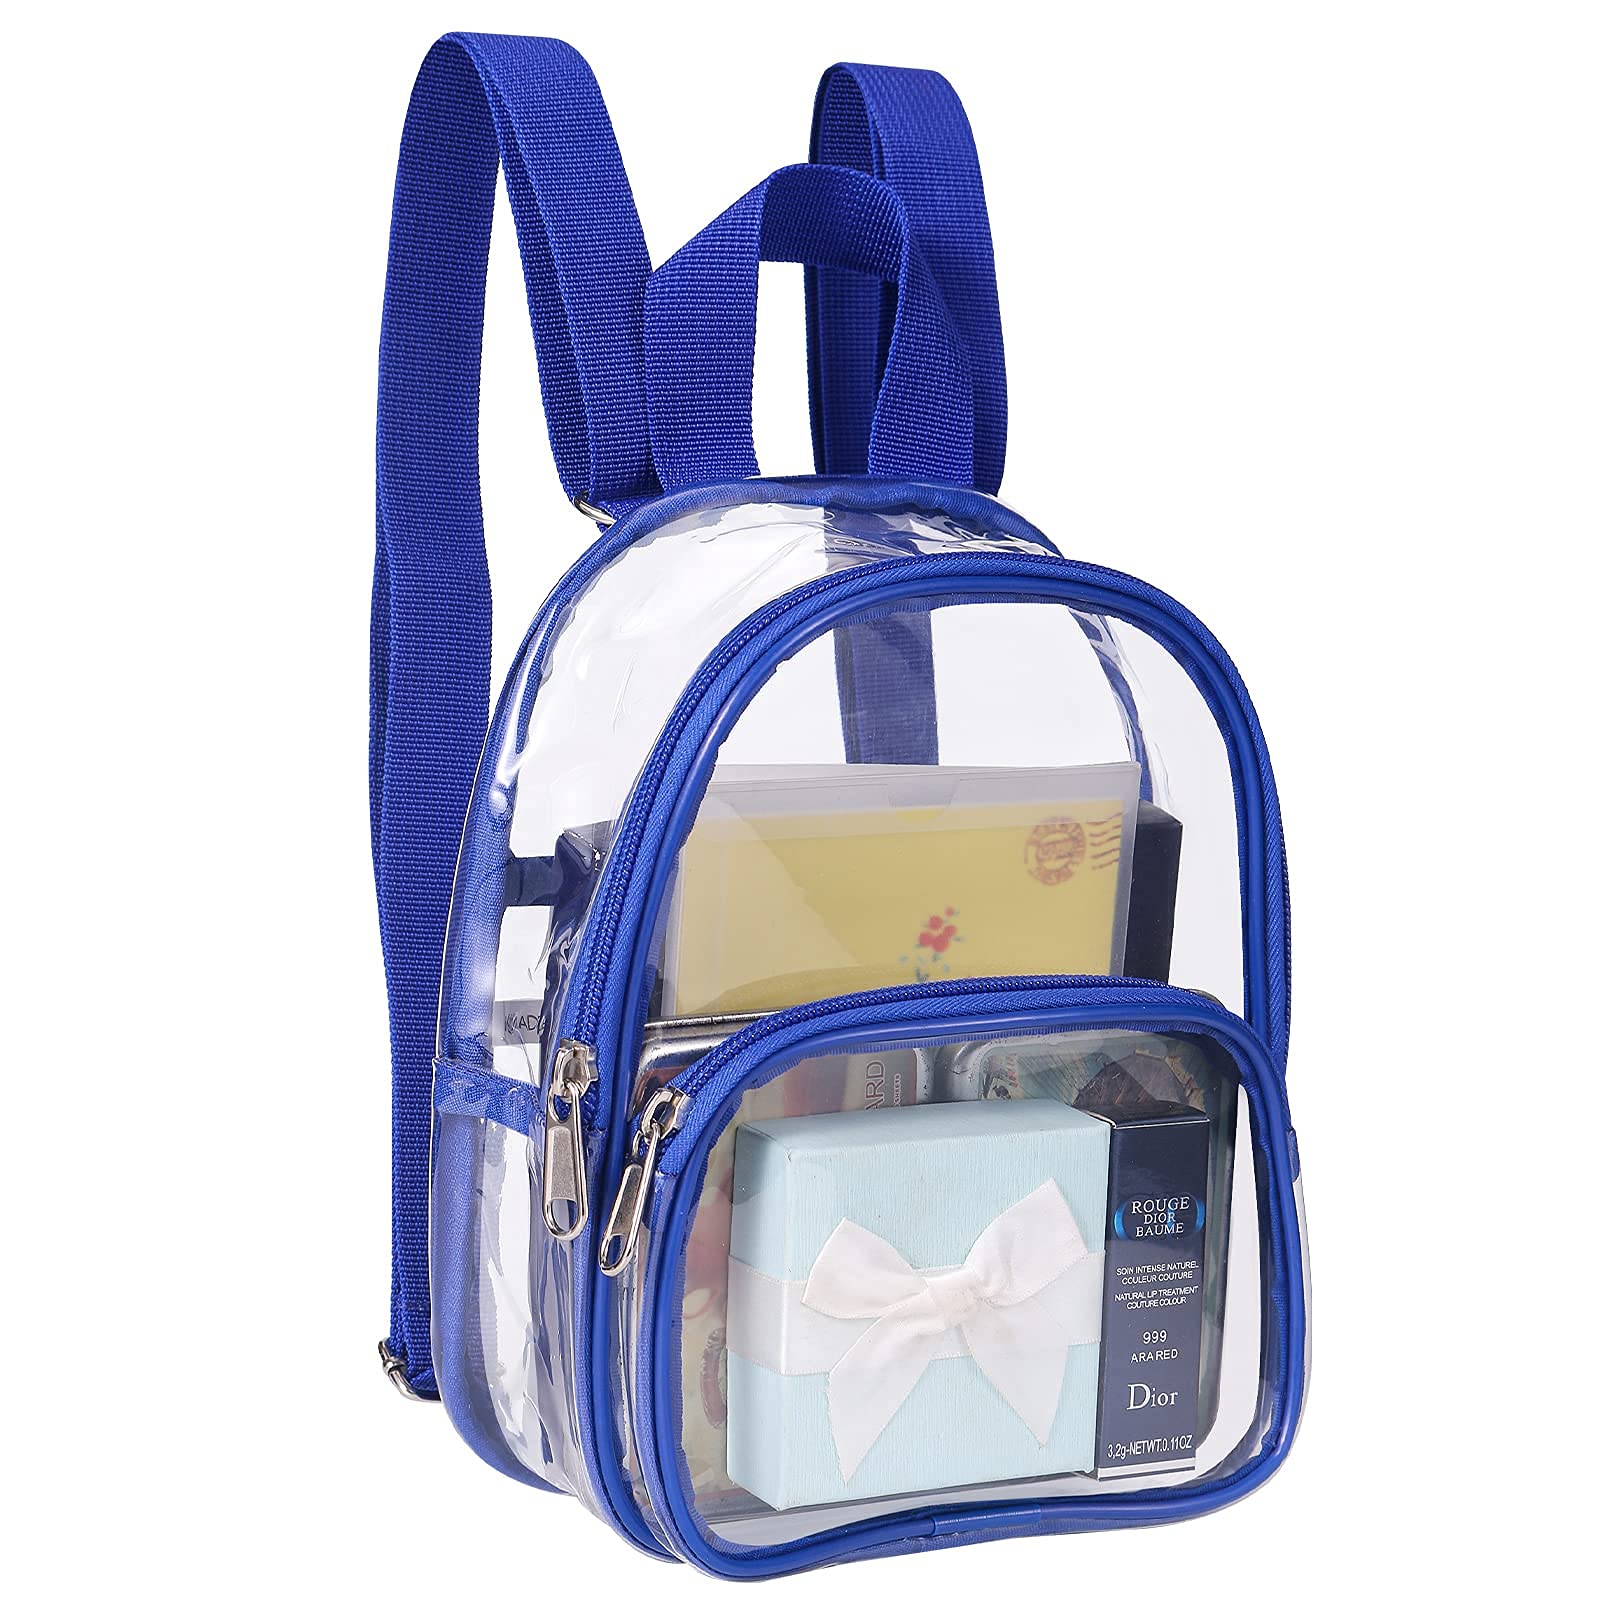 USPECLARE Clear Backpack Stadium Approved,Clear Bag Clear Mini Backpack with Size 7.5"x2.8"x9" for Girls, Waterproof Small Clear